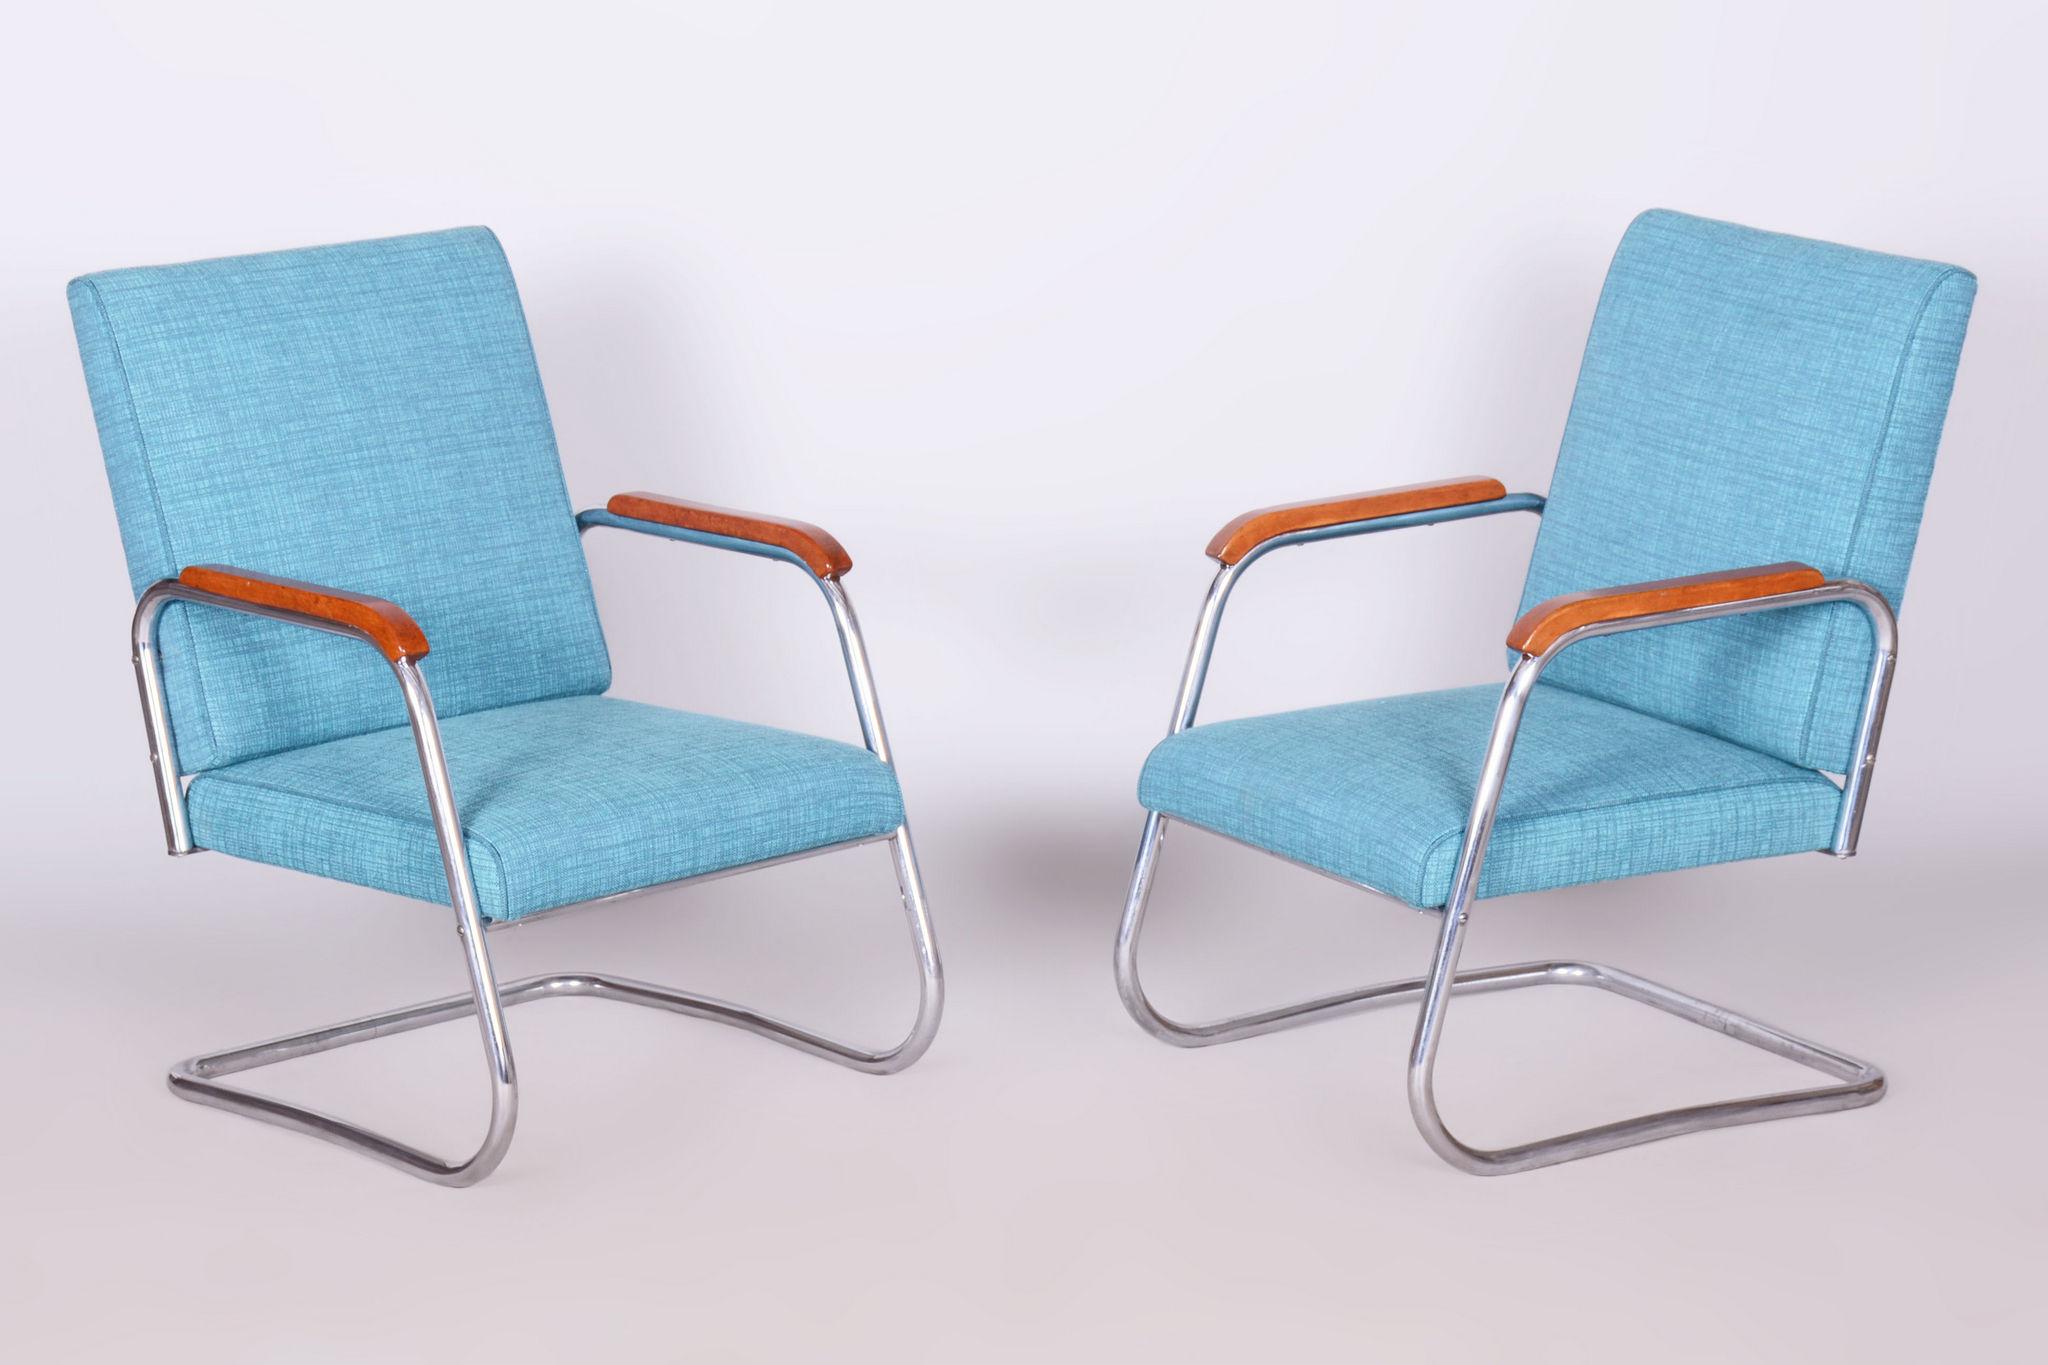 Restored Bauhaus Pair of Armchairs.

Designer: Karel E. Ort
Maker: Hynek Gottwald
Source: Czechia (Czehoslovakia)
Period: 1930-1939
Material: Chrome-plated Steel, Fabric

Newly professionally upholstered according to the original model according to